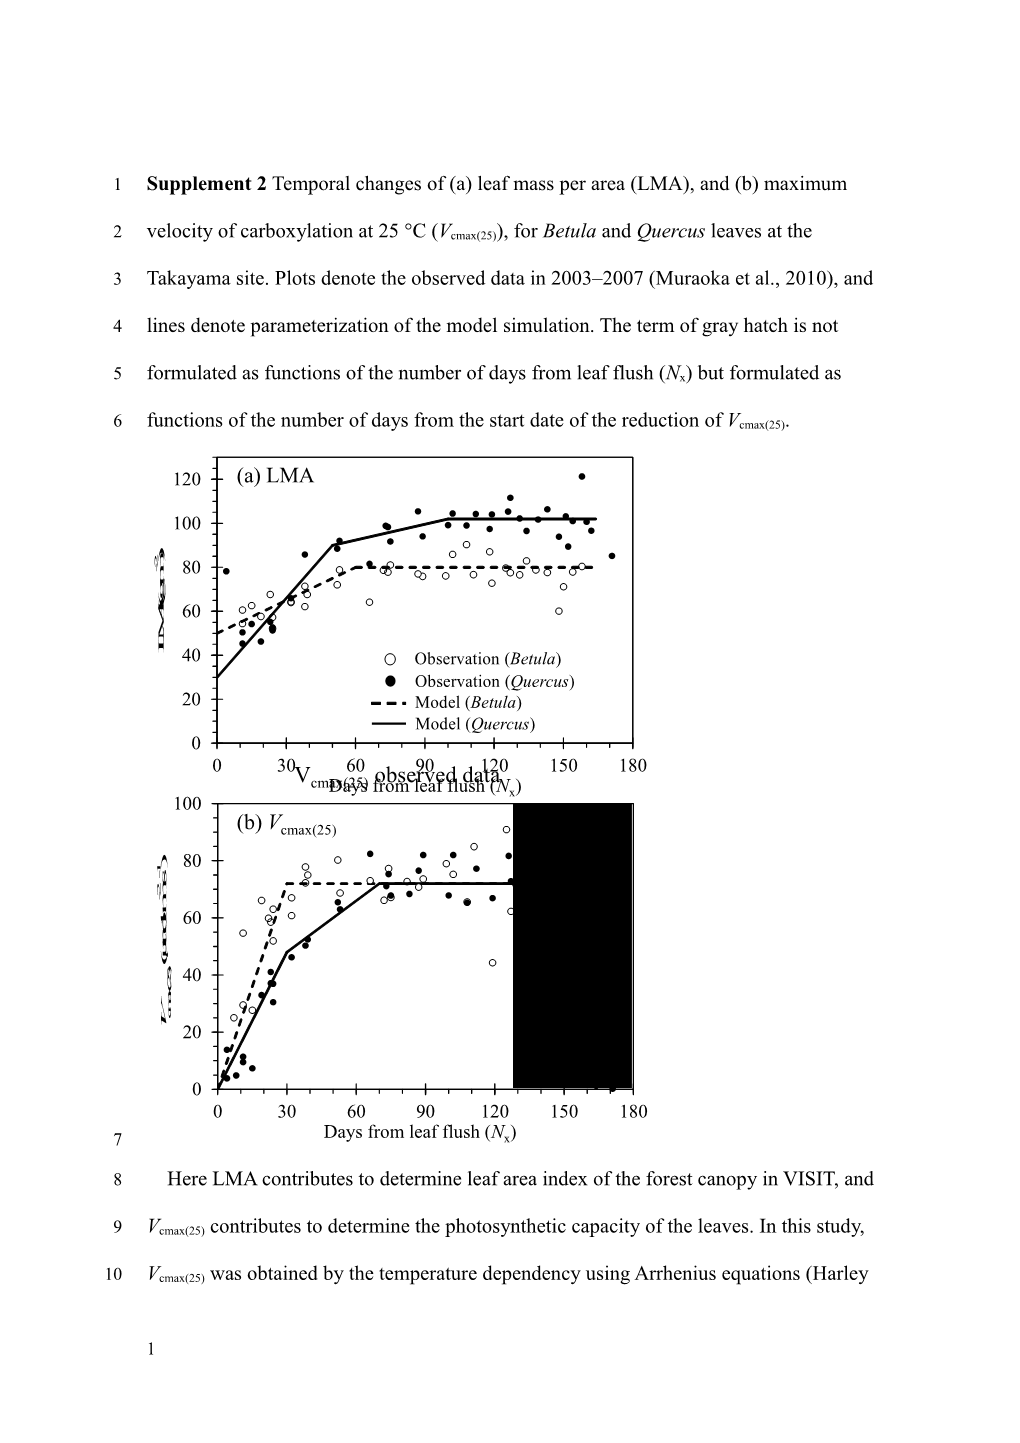 Supplement 2Temporal Changes of (A) Leaf Mass Per Area (LMA), and (B) Maximum Velocity